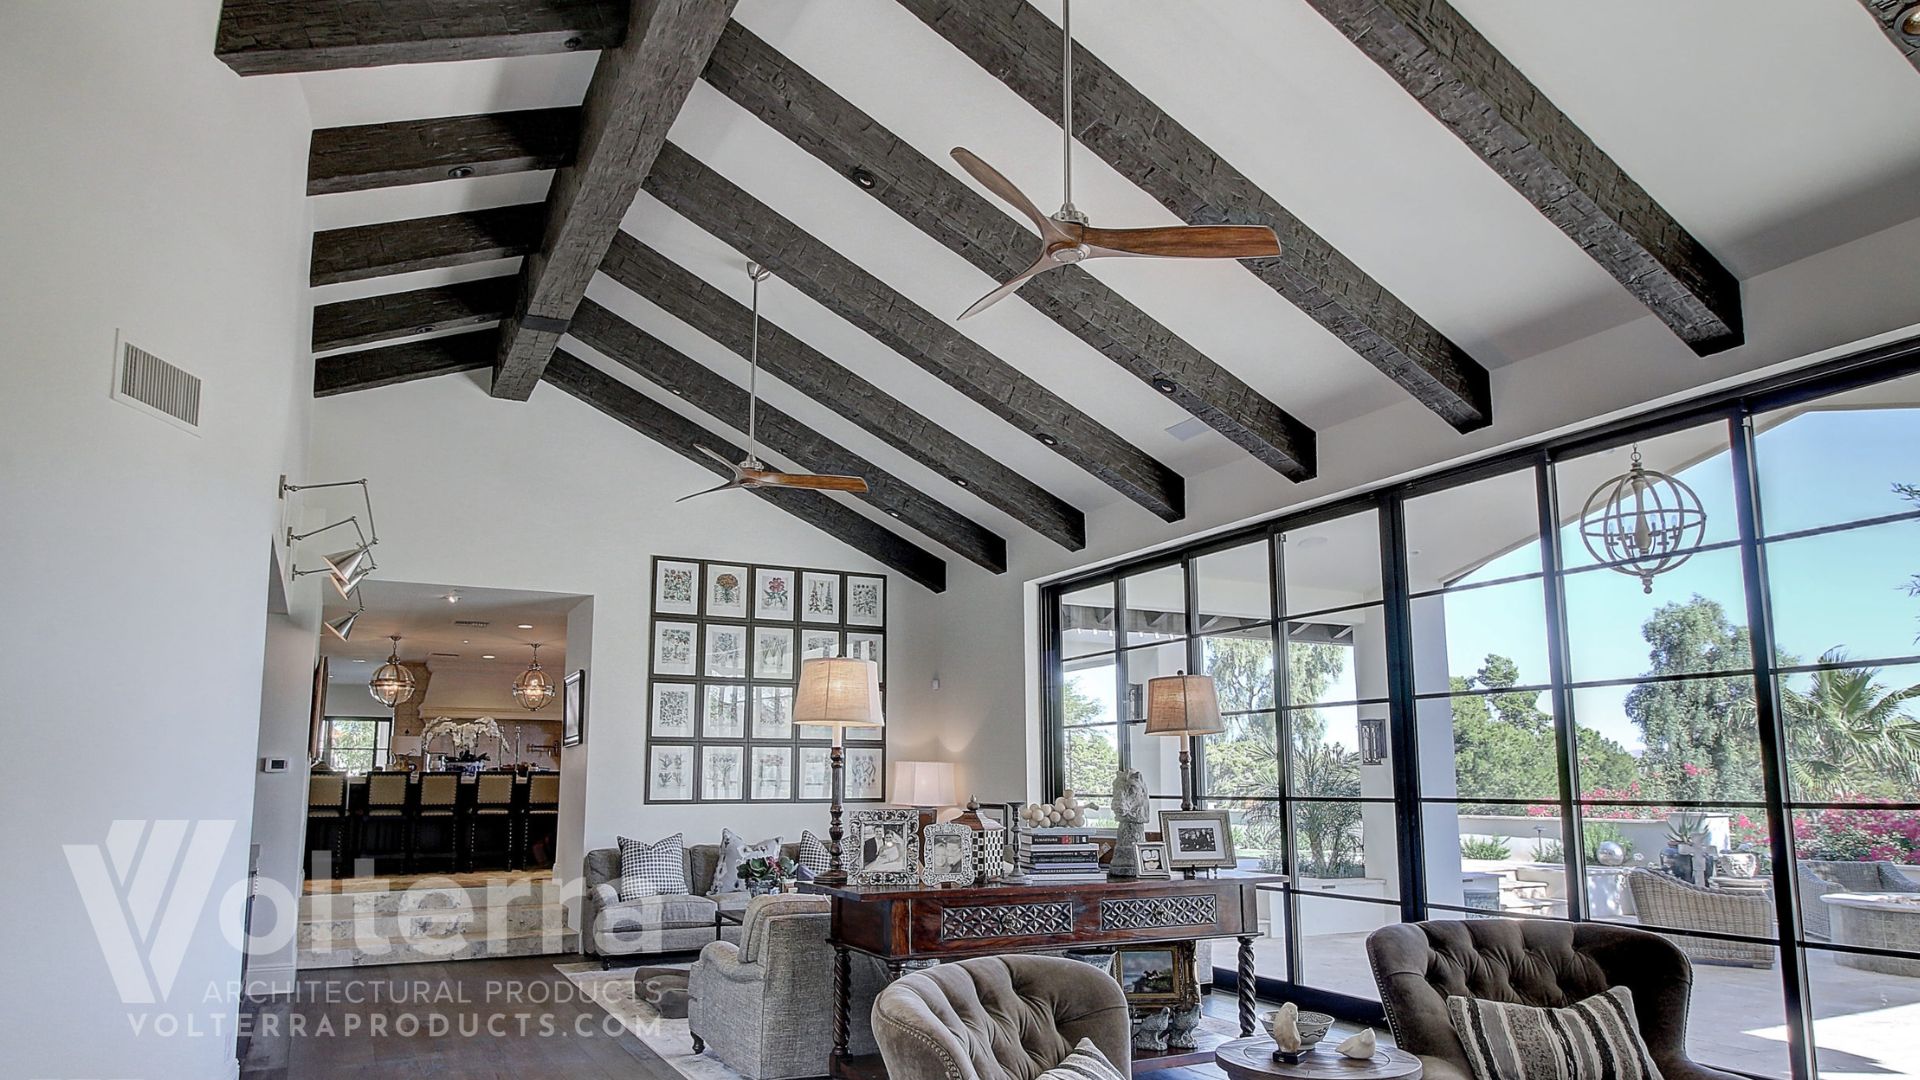 Achieving a Modern Look With Decorative Ceiling Wood Beams